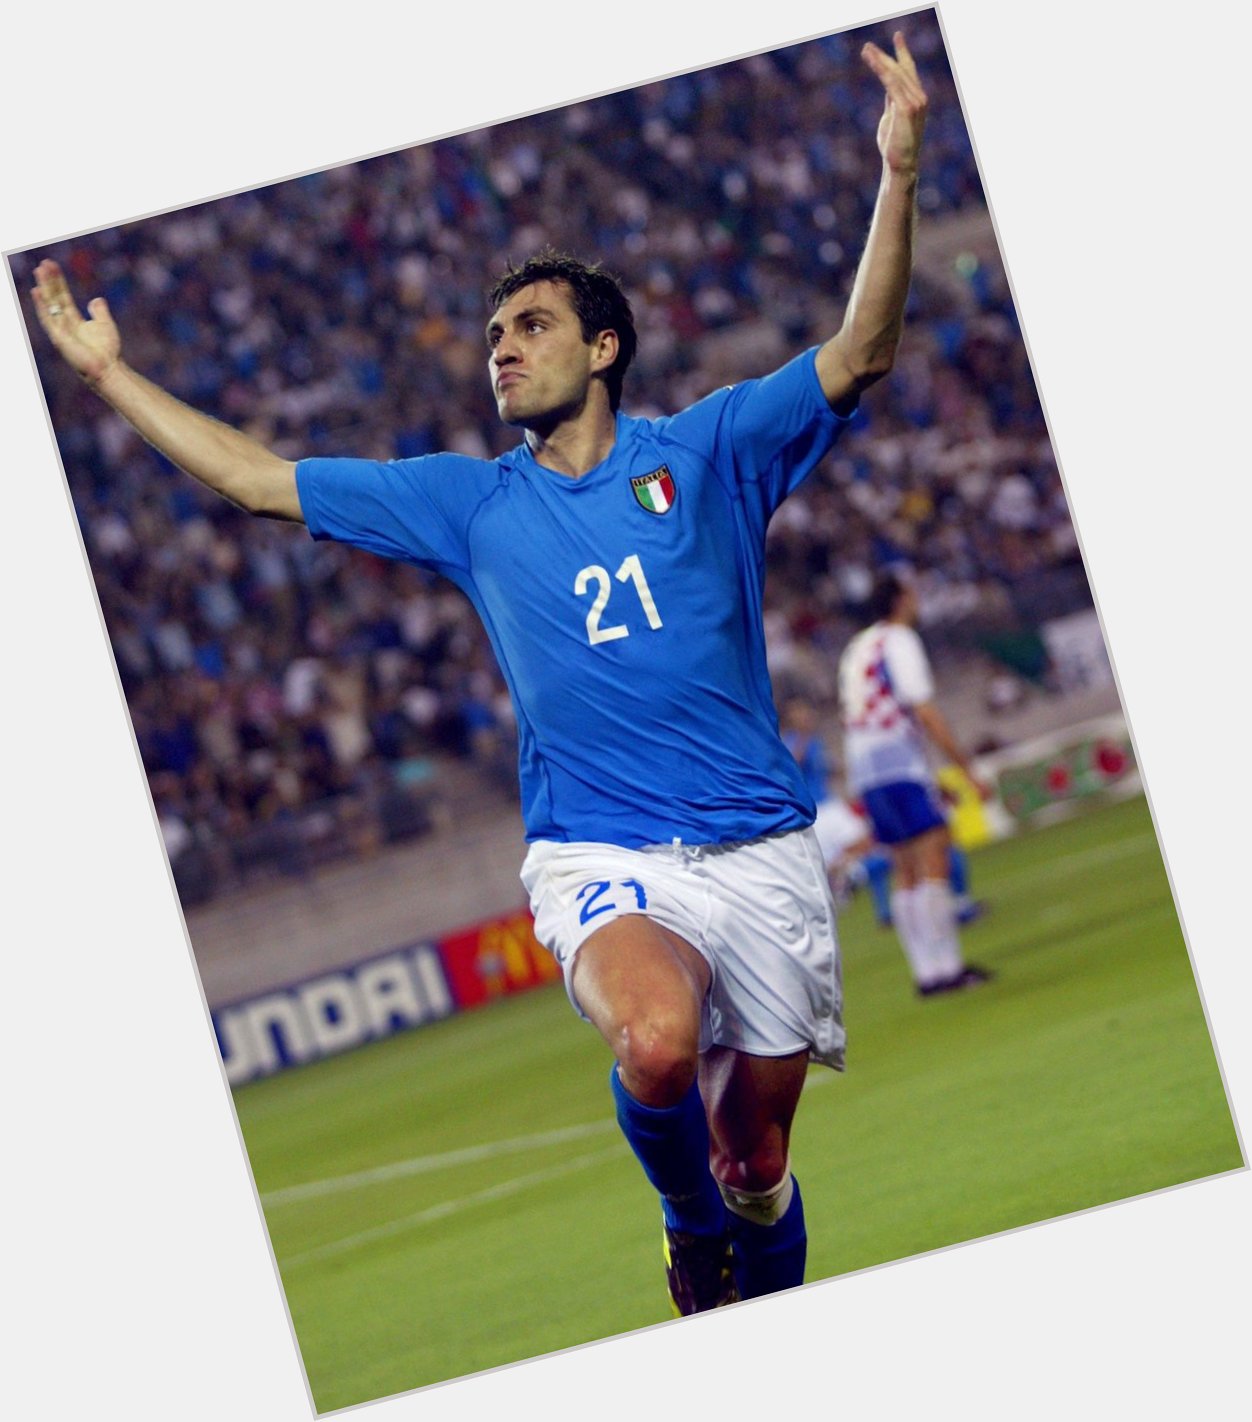   Happy Birthday, Christian Vieri   What s your favourite memory of him?  | 